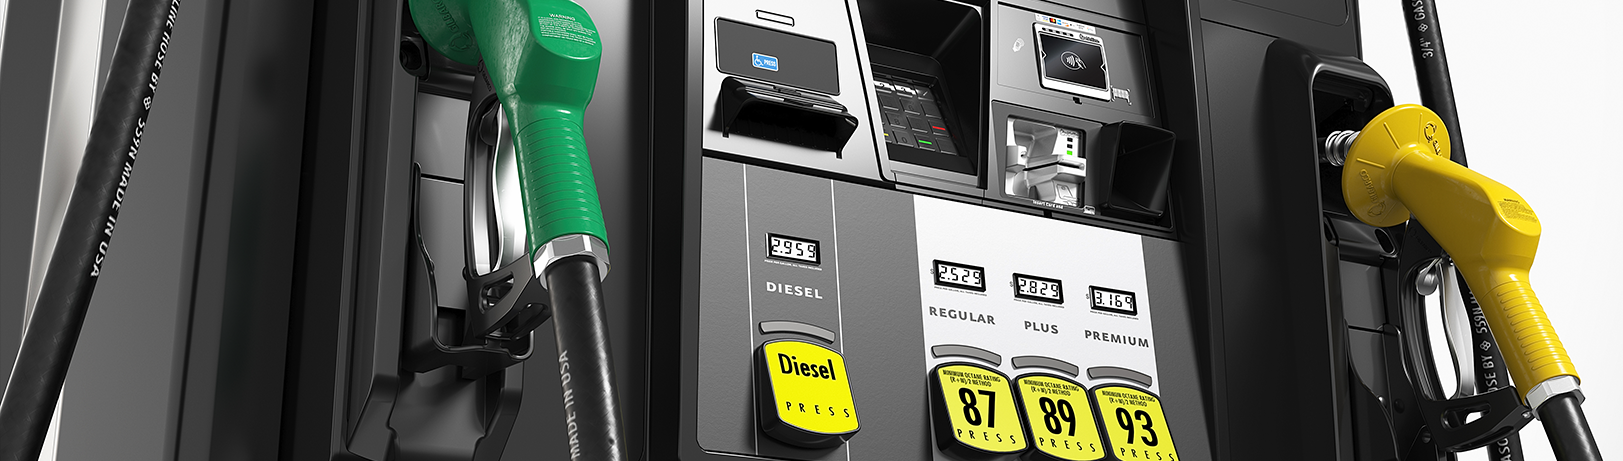 Close-up of a black fuel dispenser with green and yellow nozzles, digital price displays for diesel, regular, plus, and premium fuel options, and payment terminals.